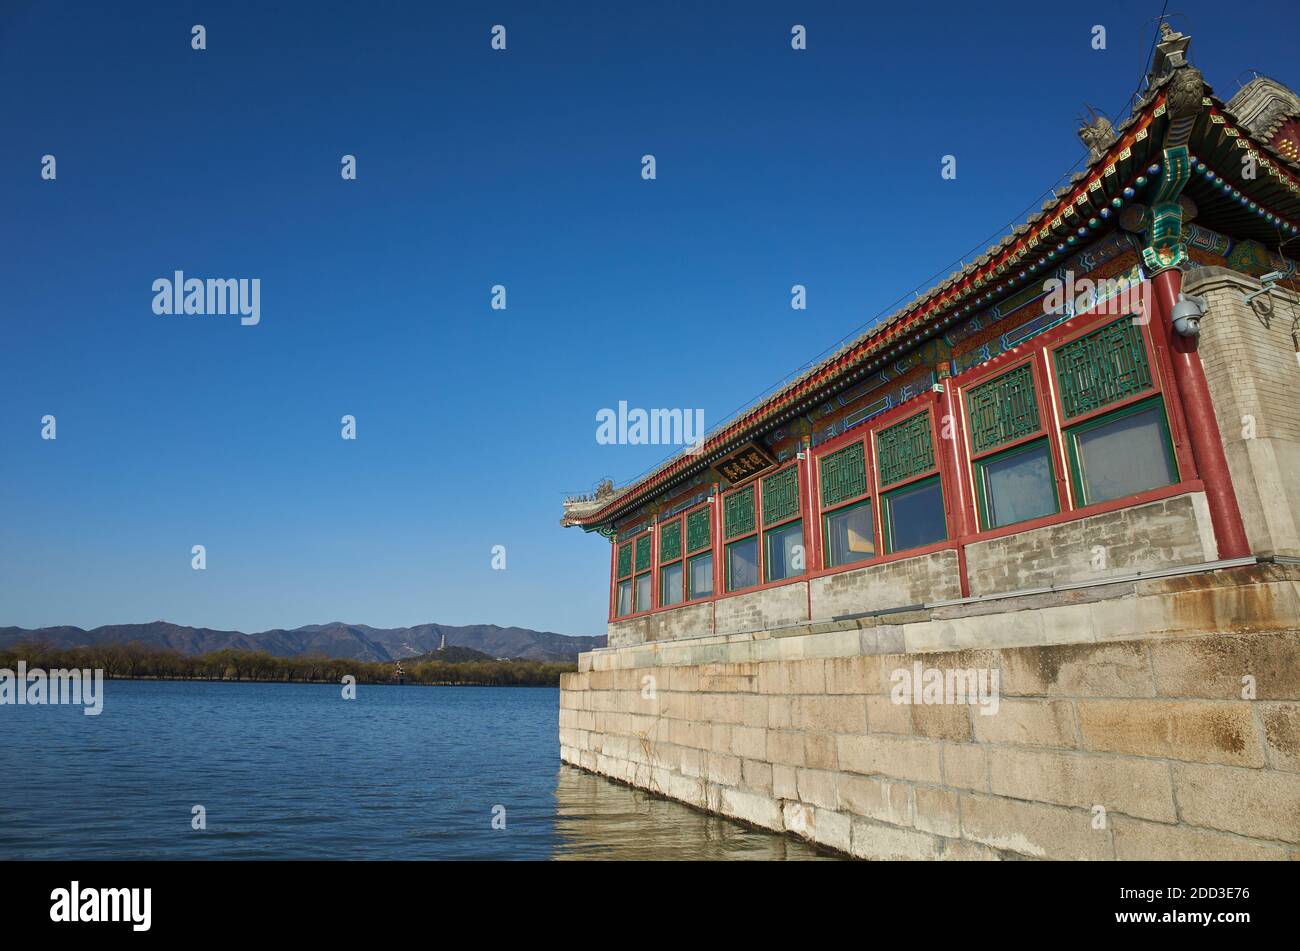 The Summer Palace in Beijing scenery Stock Photo